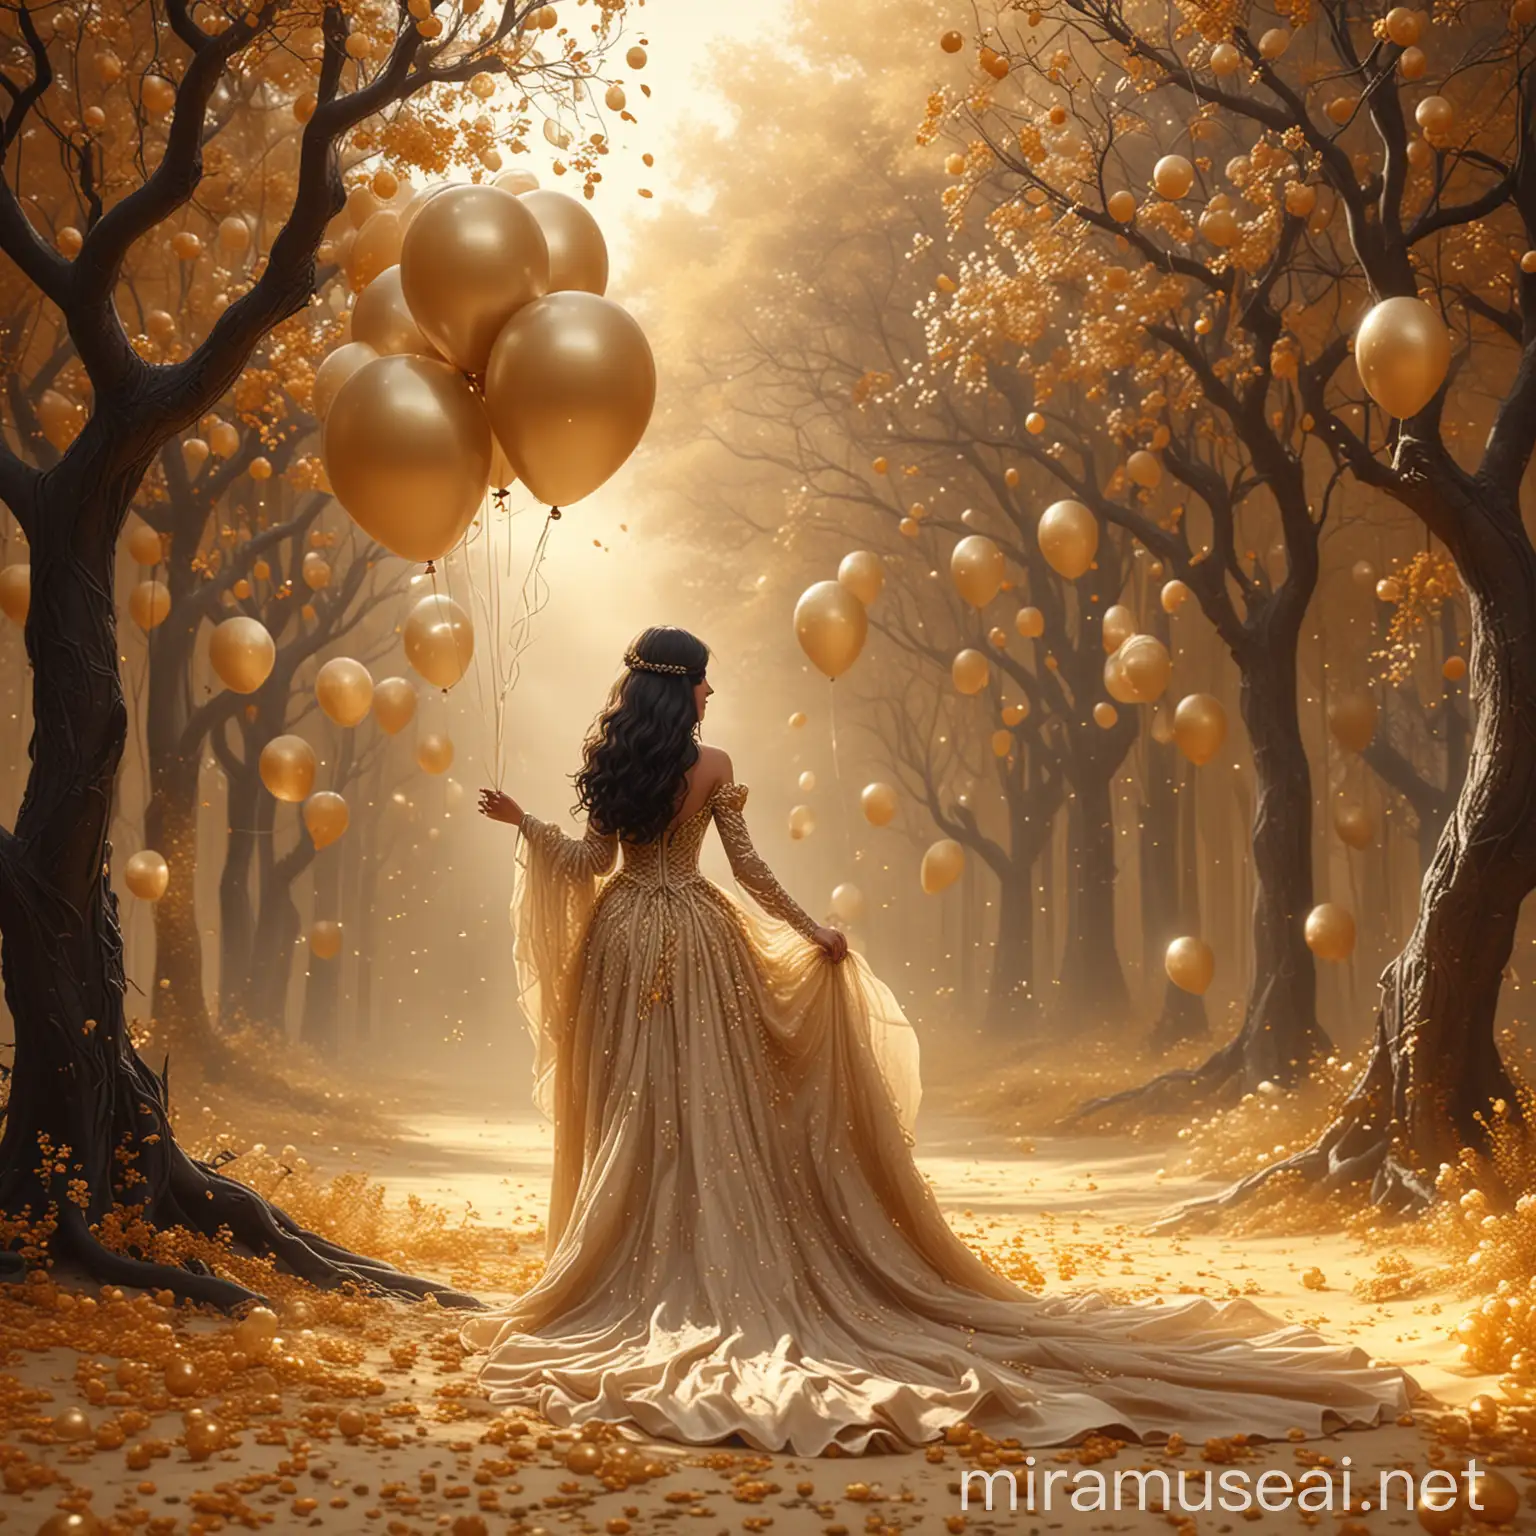 Elegant Woman in Beige Wedding Dress with Balloons in Fantasy Setting